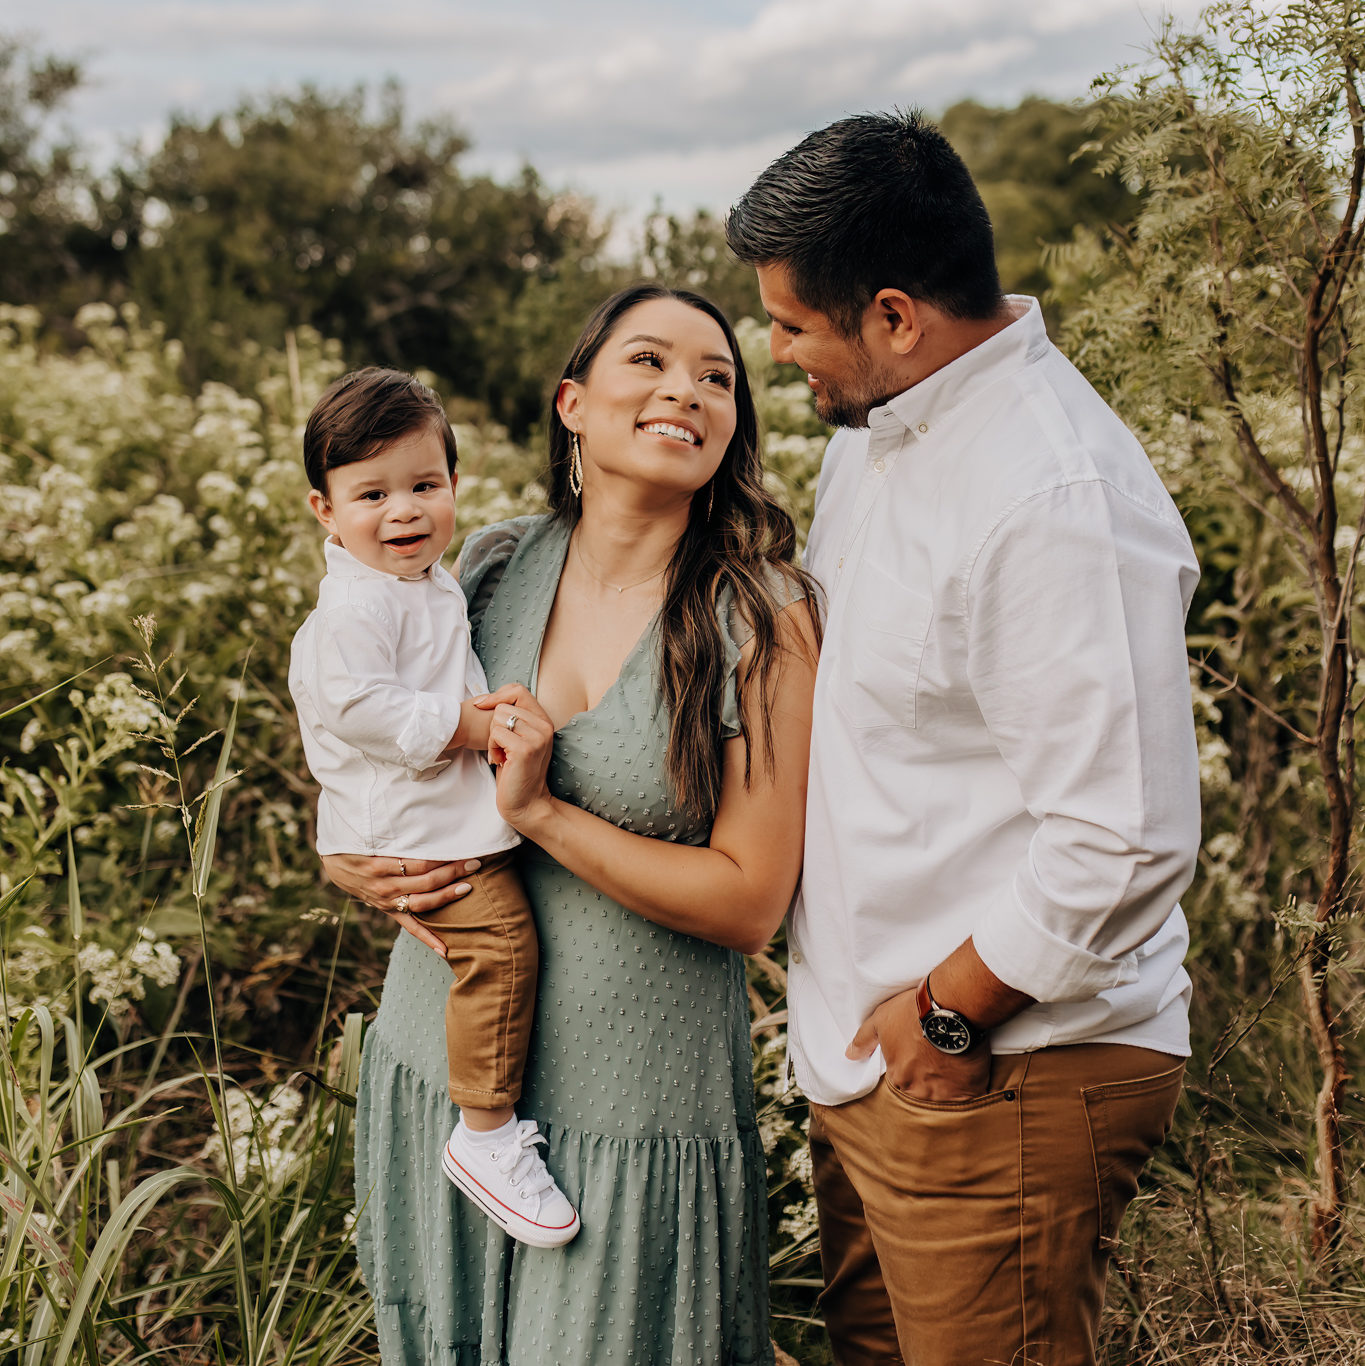 San Antonio photography spot for family photos with tall grasses, white flowers, and pretty trees.